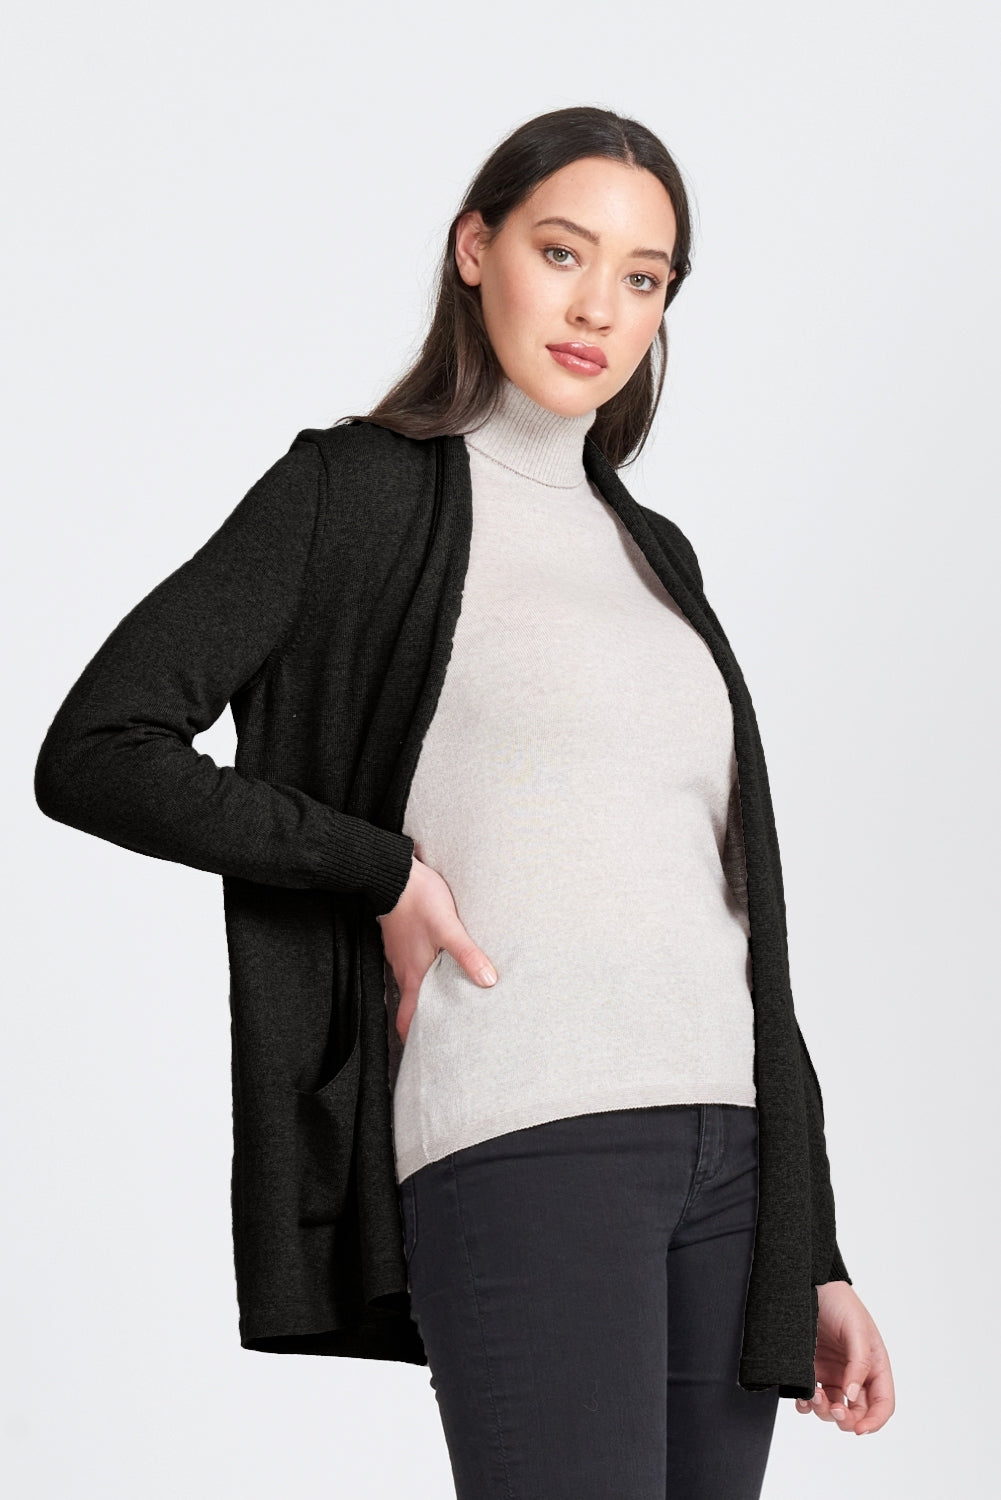 Open Front Long Cardigan in Black by Royal Merino